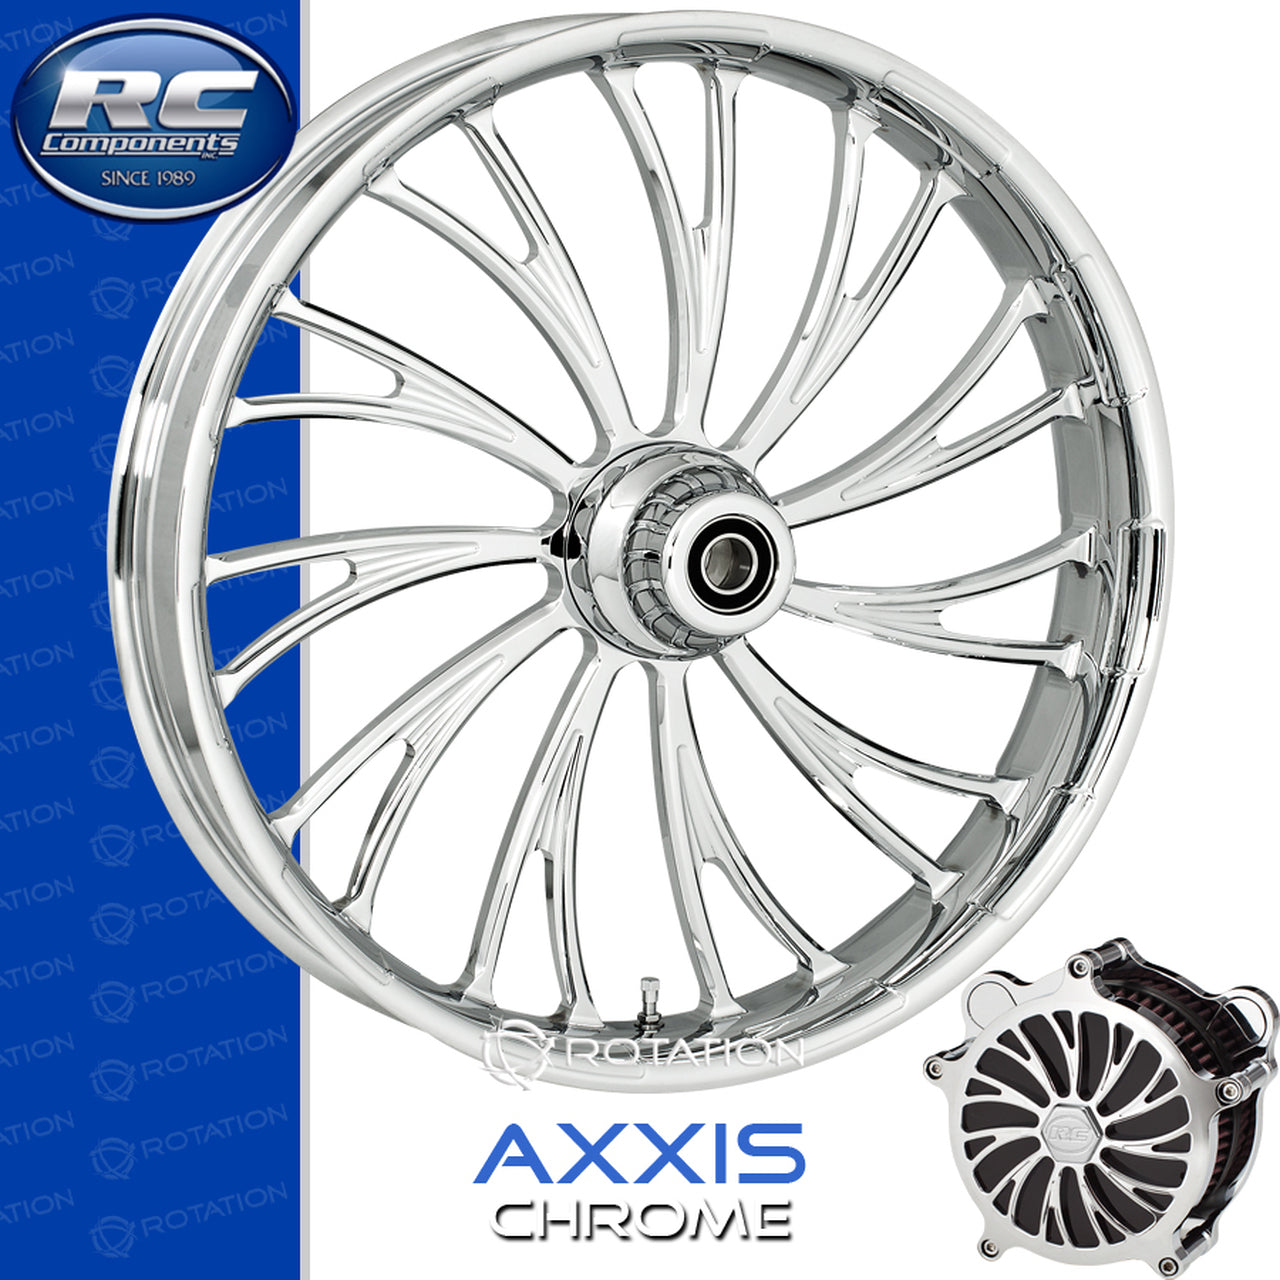 RC Components Axxis Chrome Touring Wheel